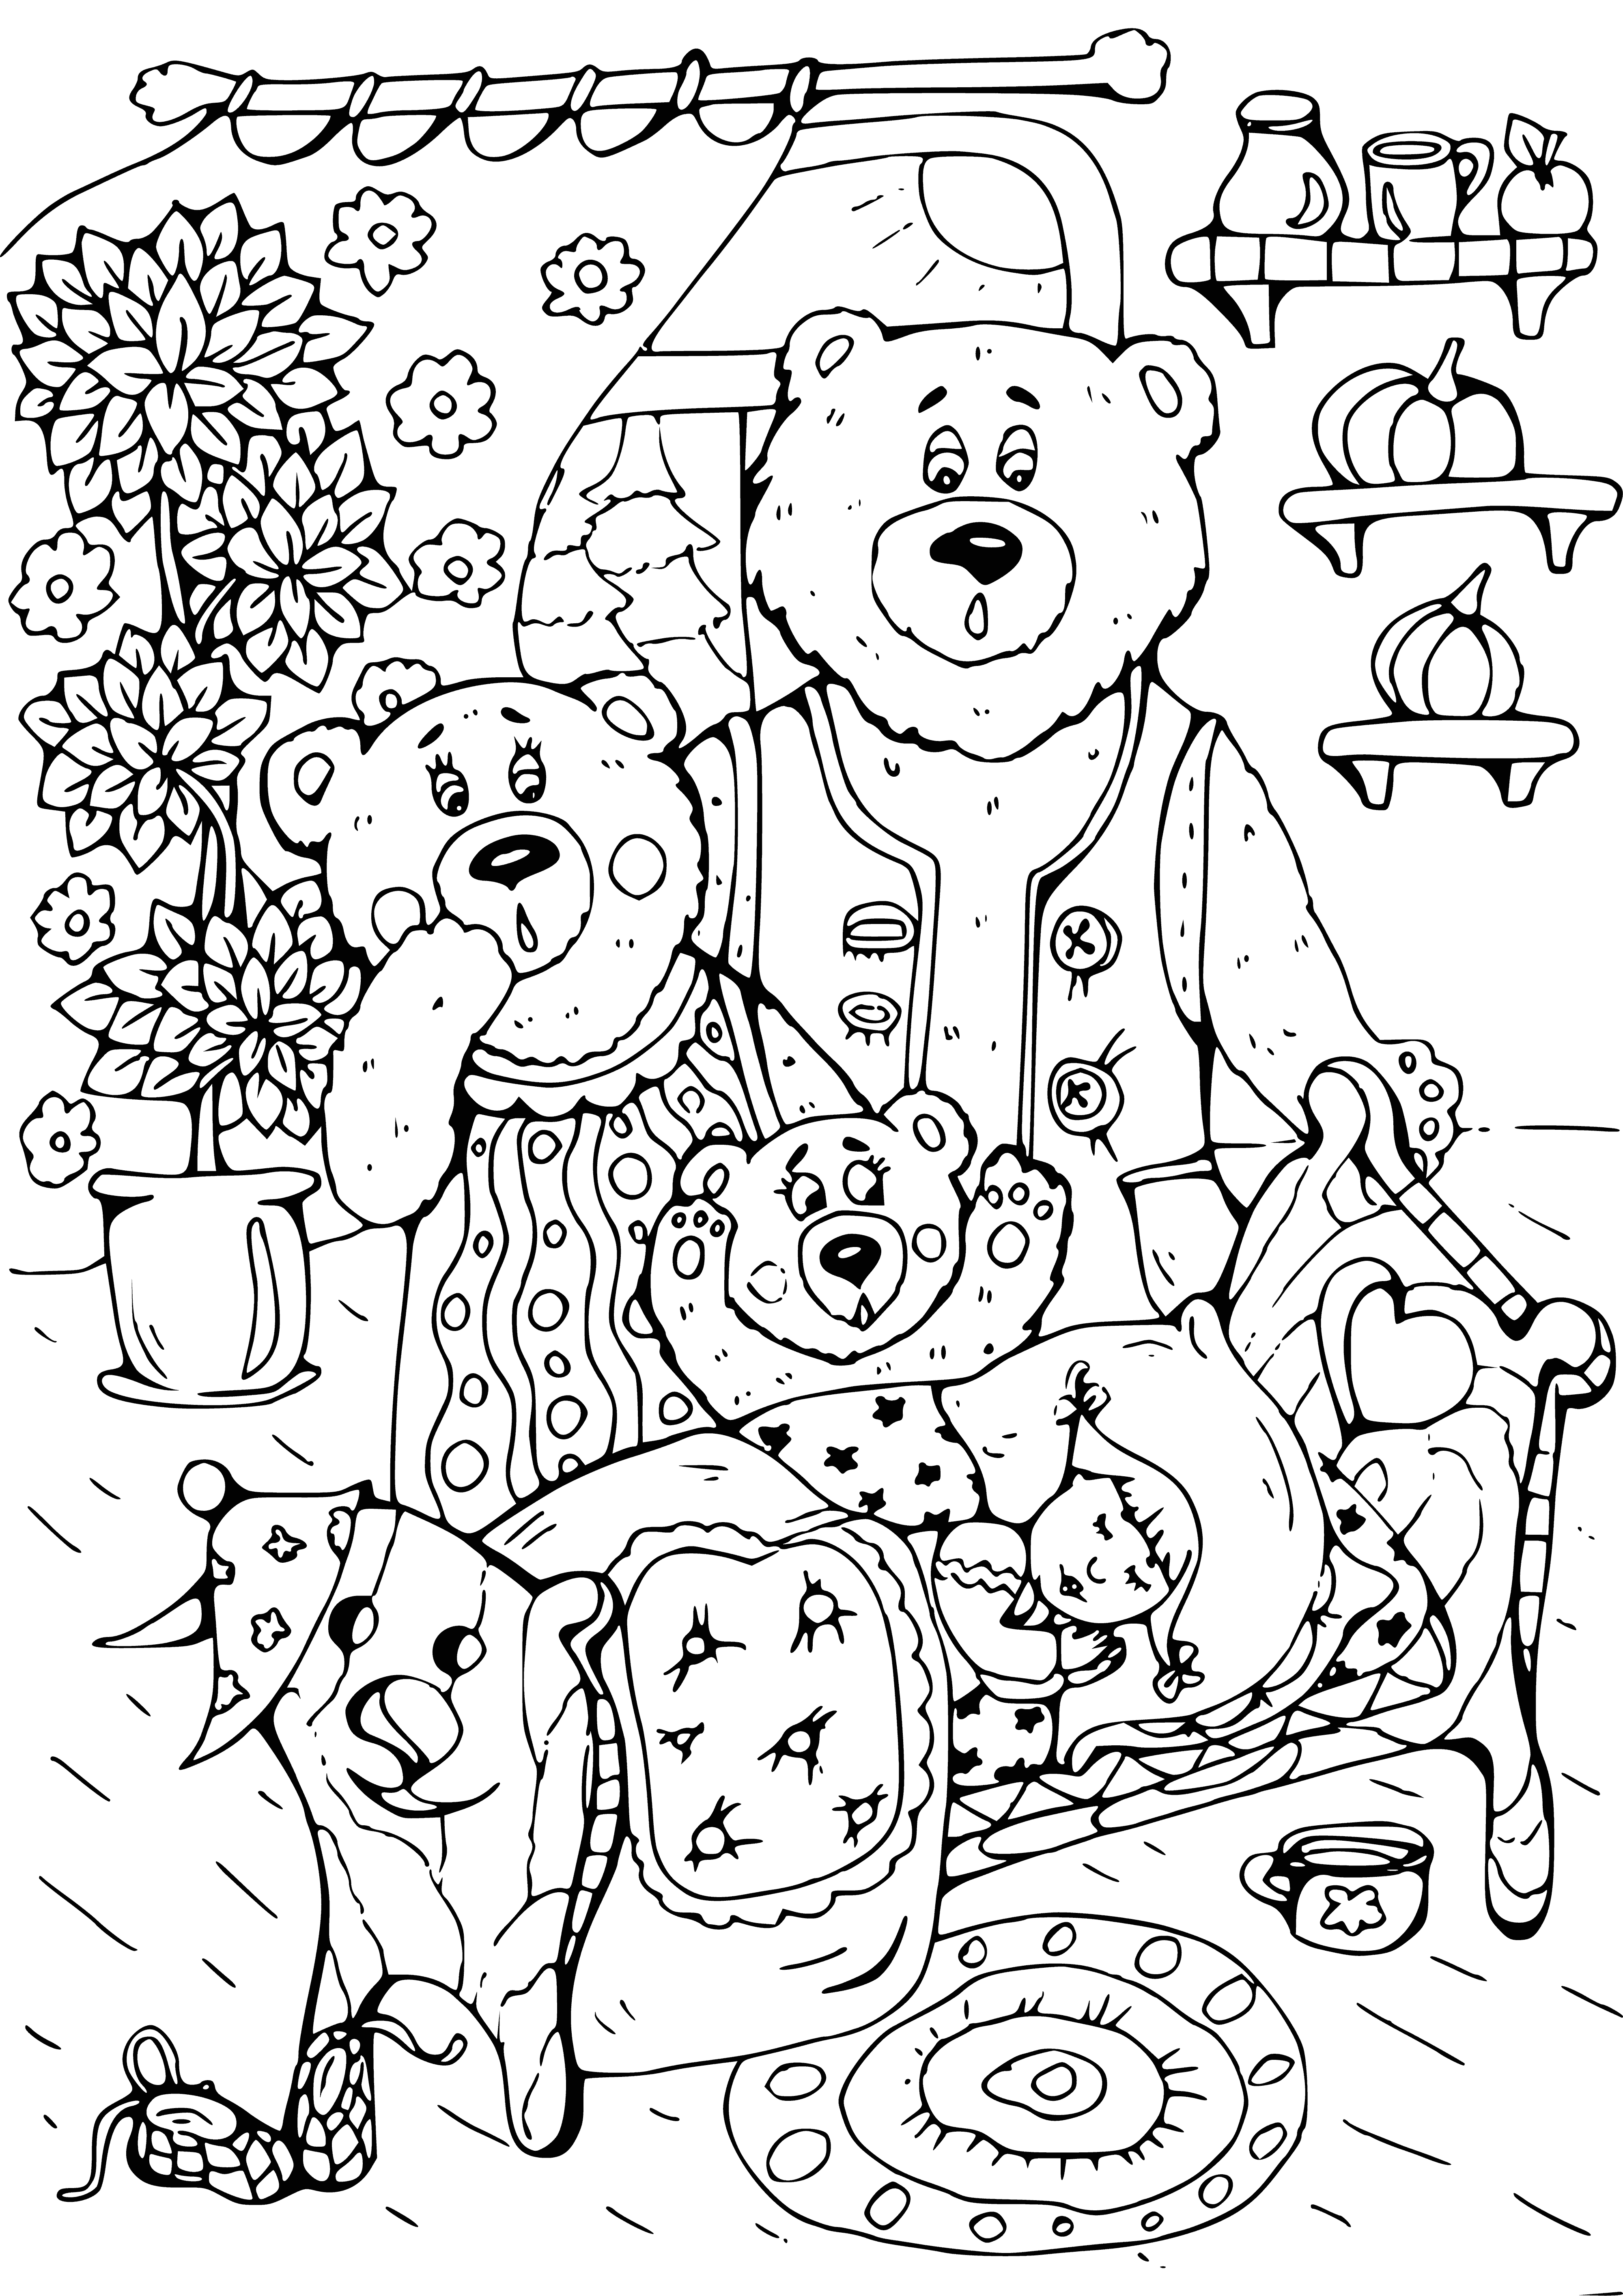 Who sleeps in my crib? coloring page